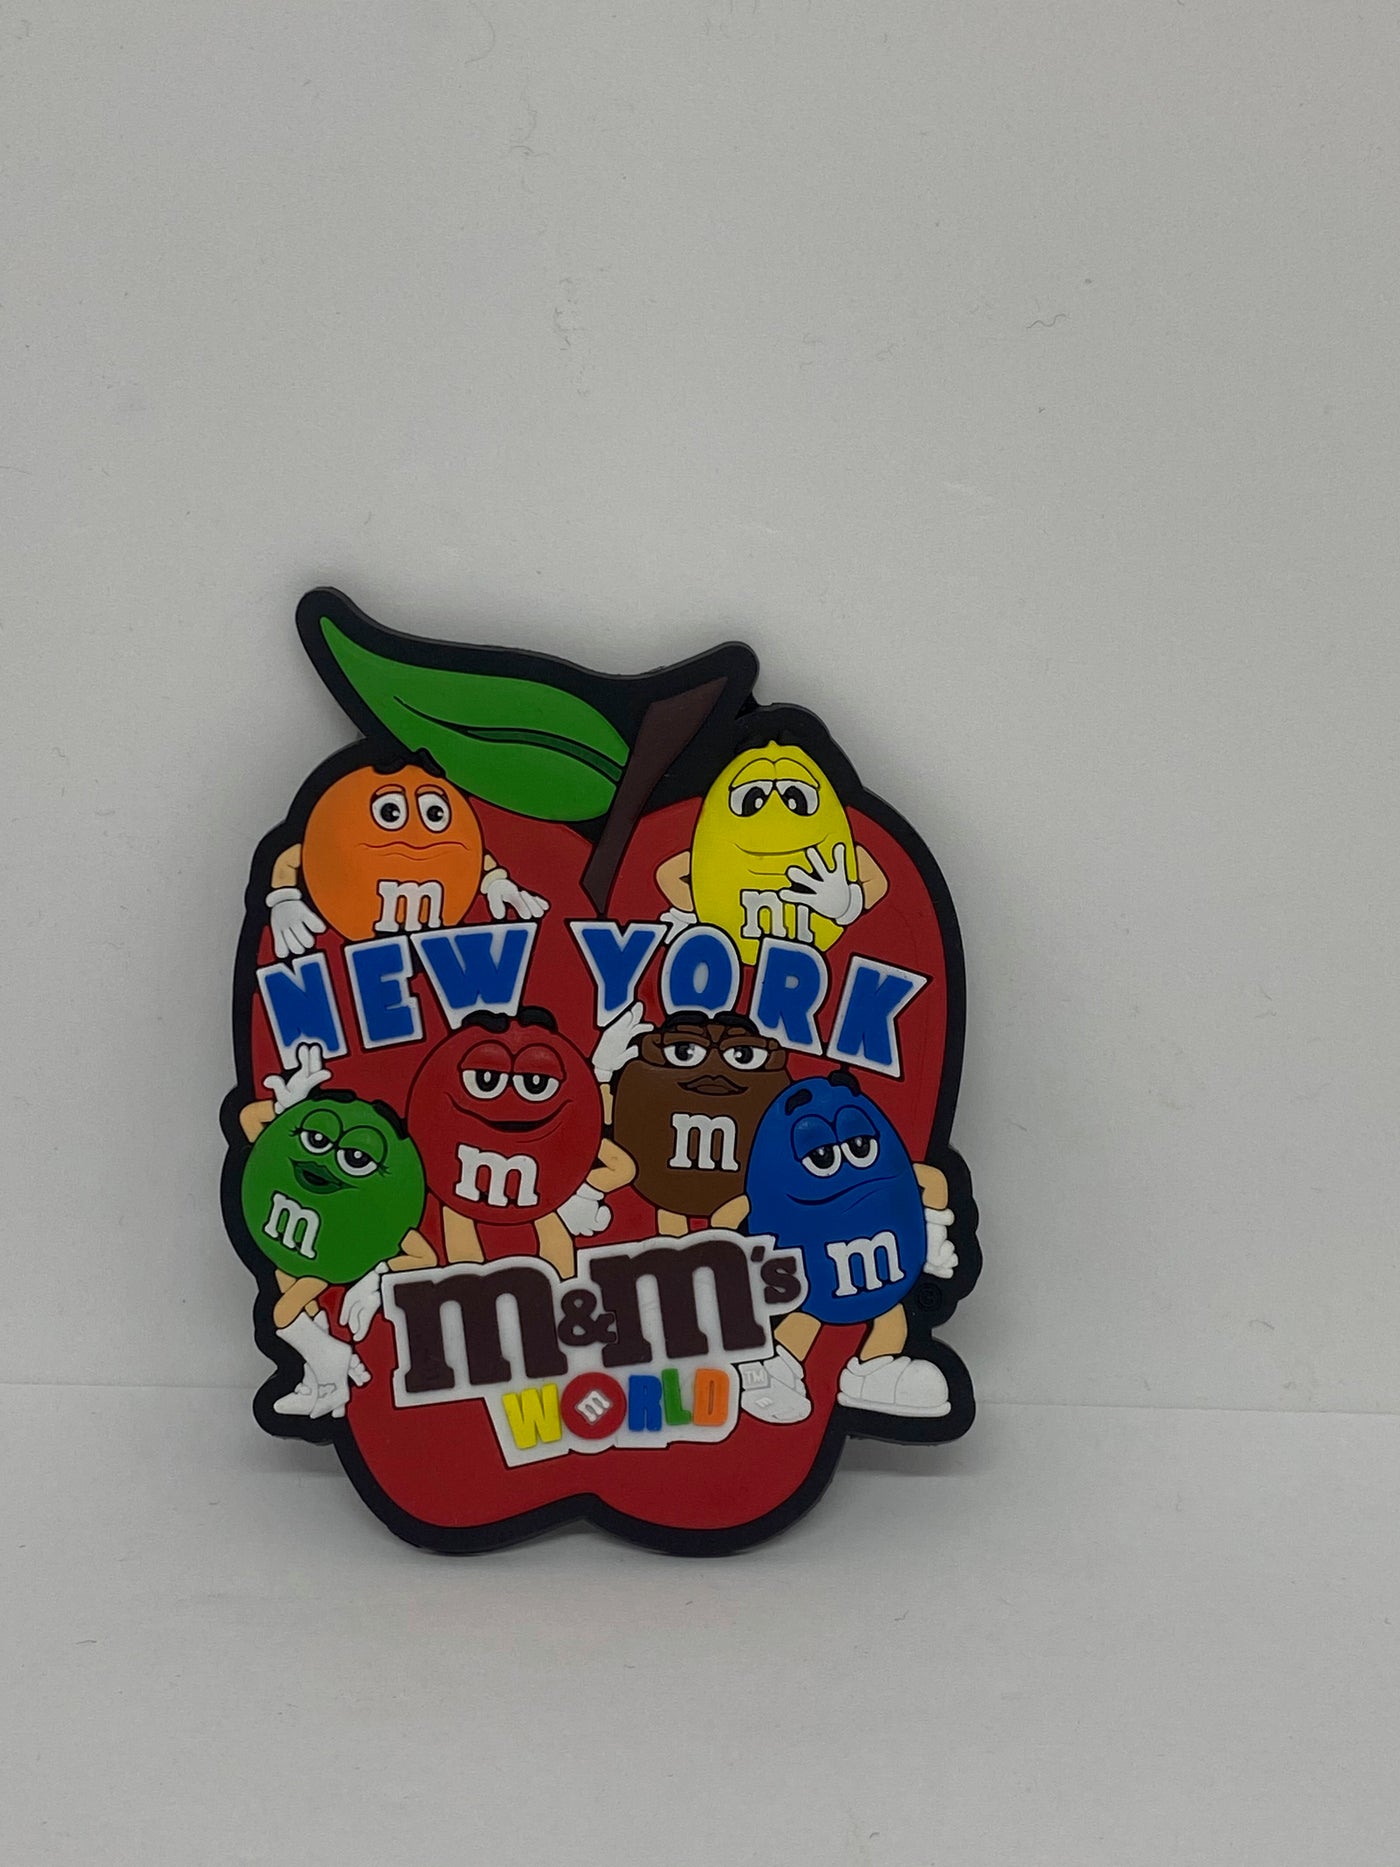 Pin on M&m characters